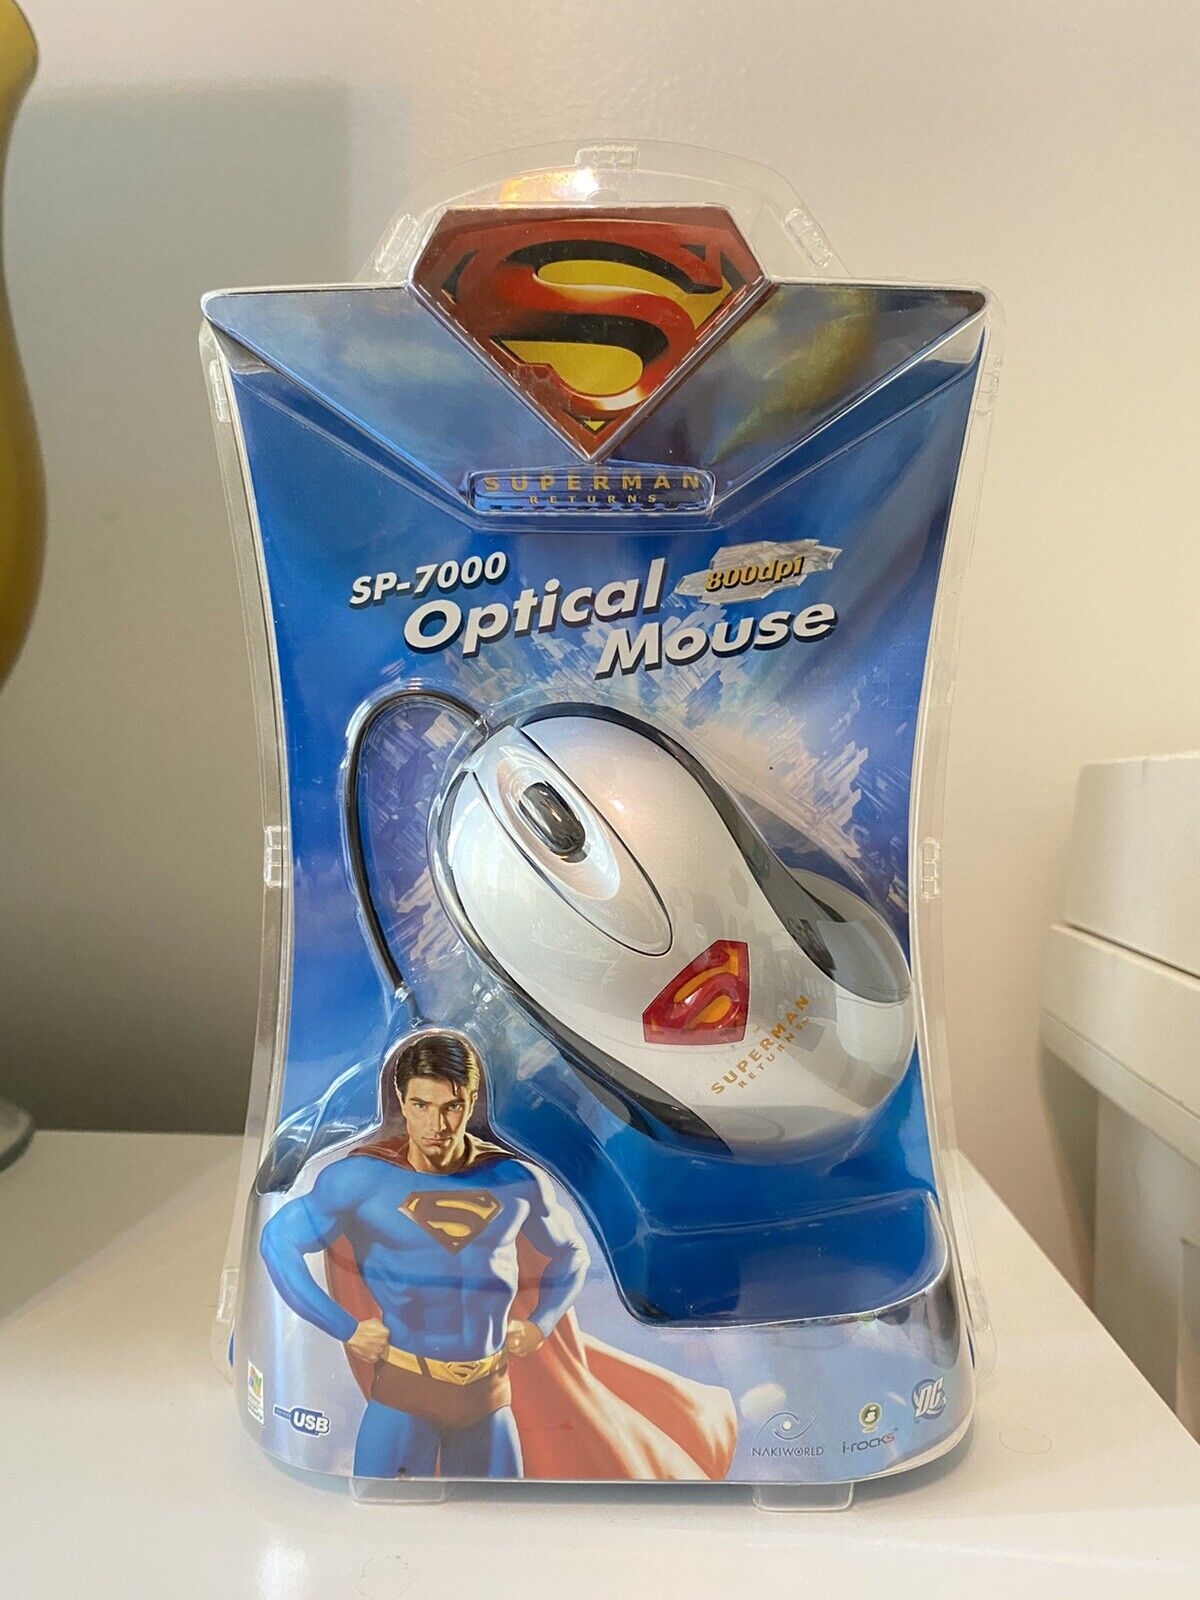 SP-7000 DC Superman Returns Optical Wired Mouse NEW RARE 800dpi